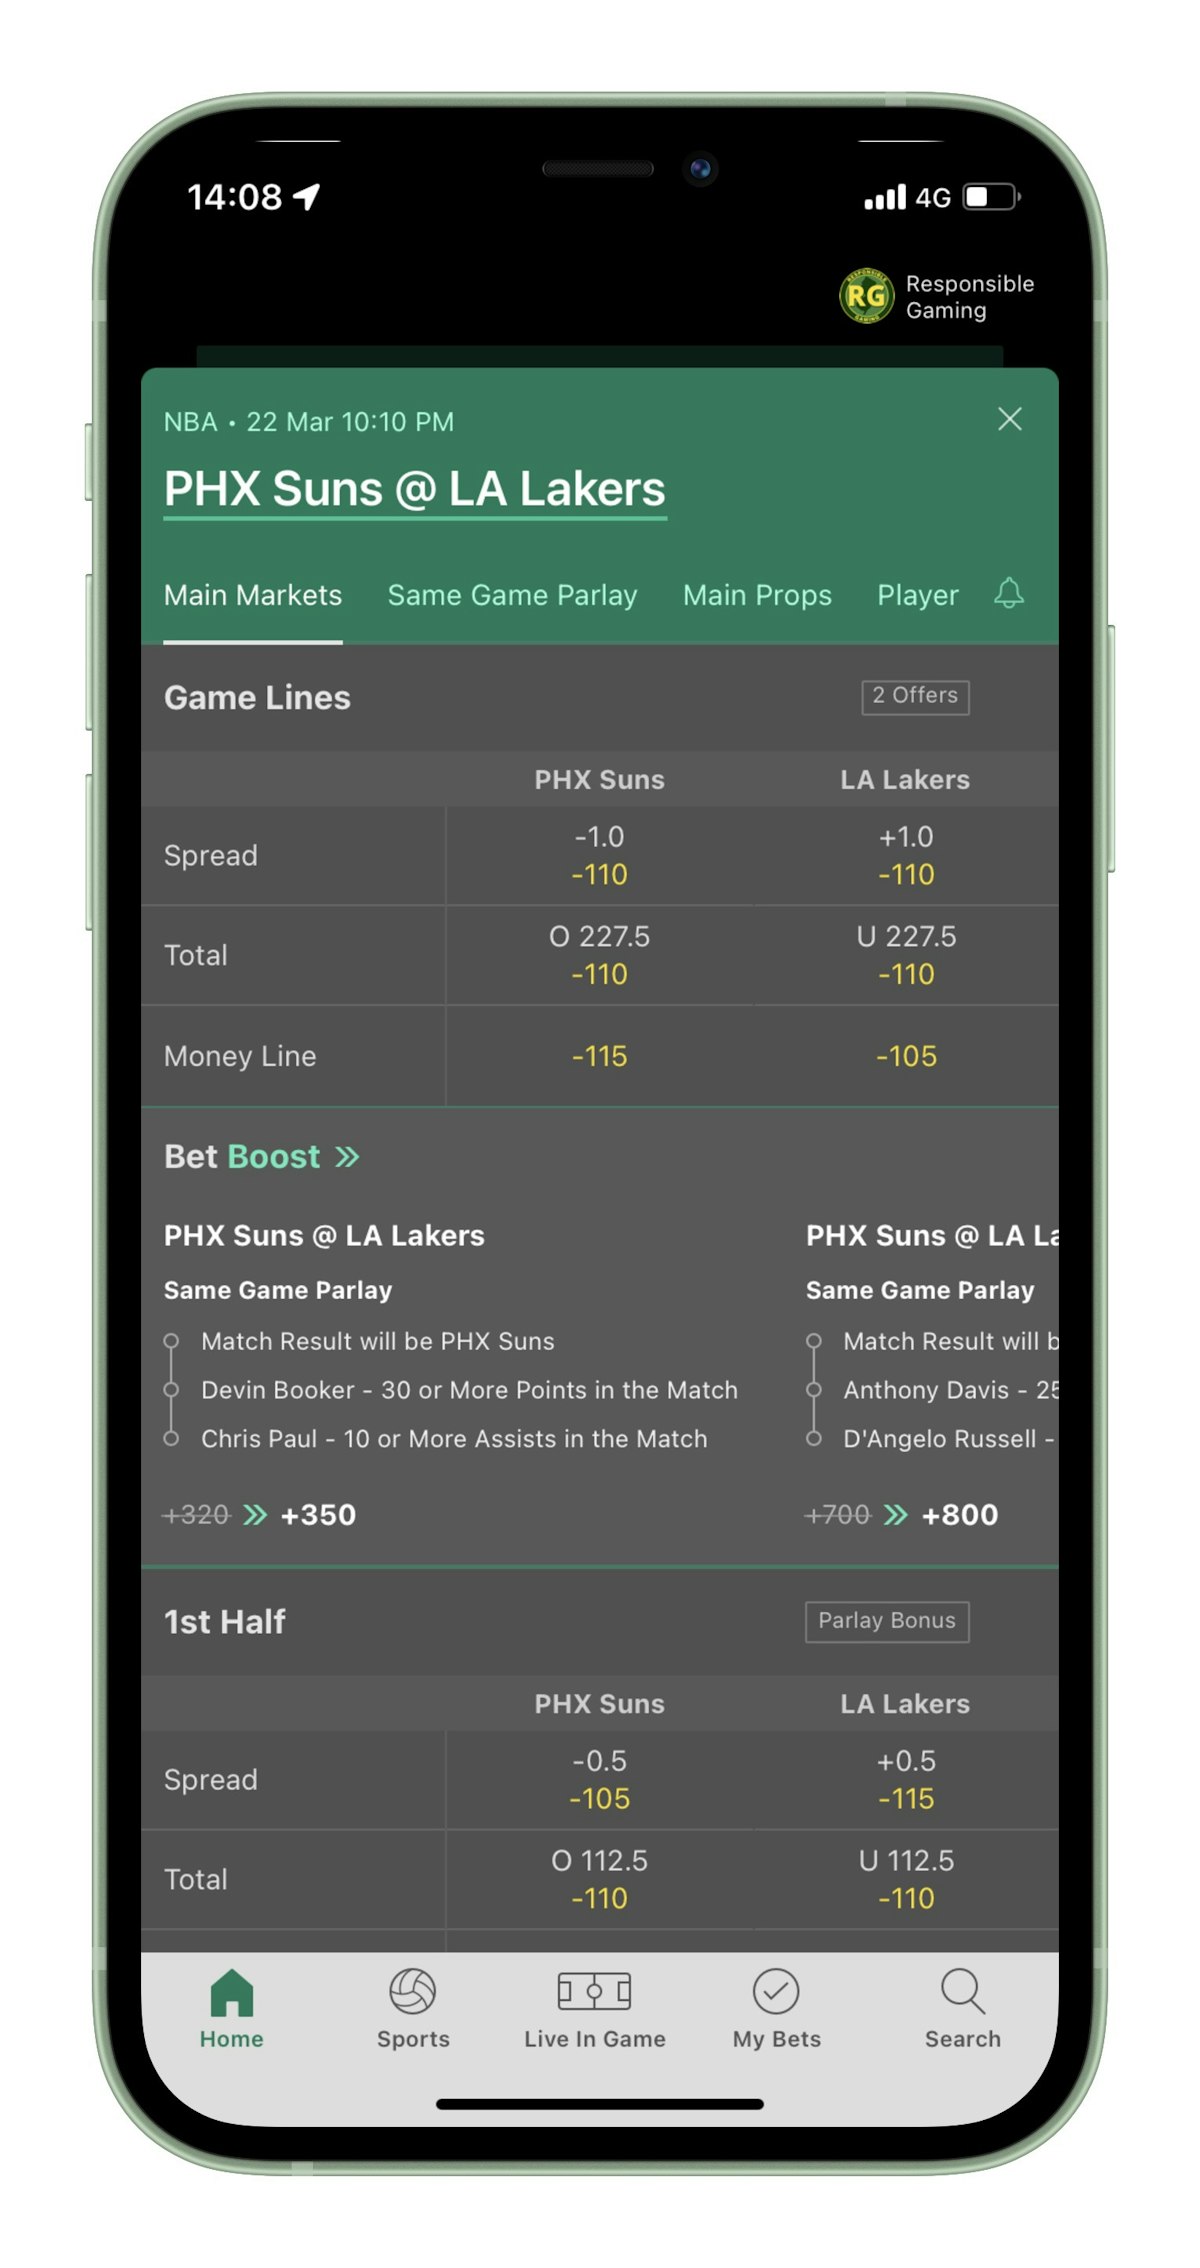 bet365 betCall for Online Live (In-Play) Betting